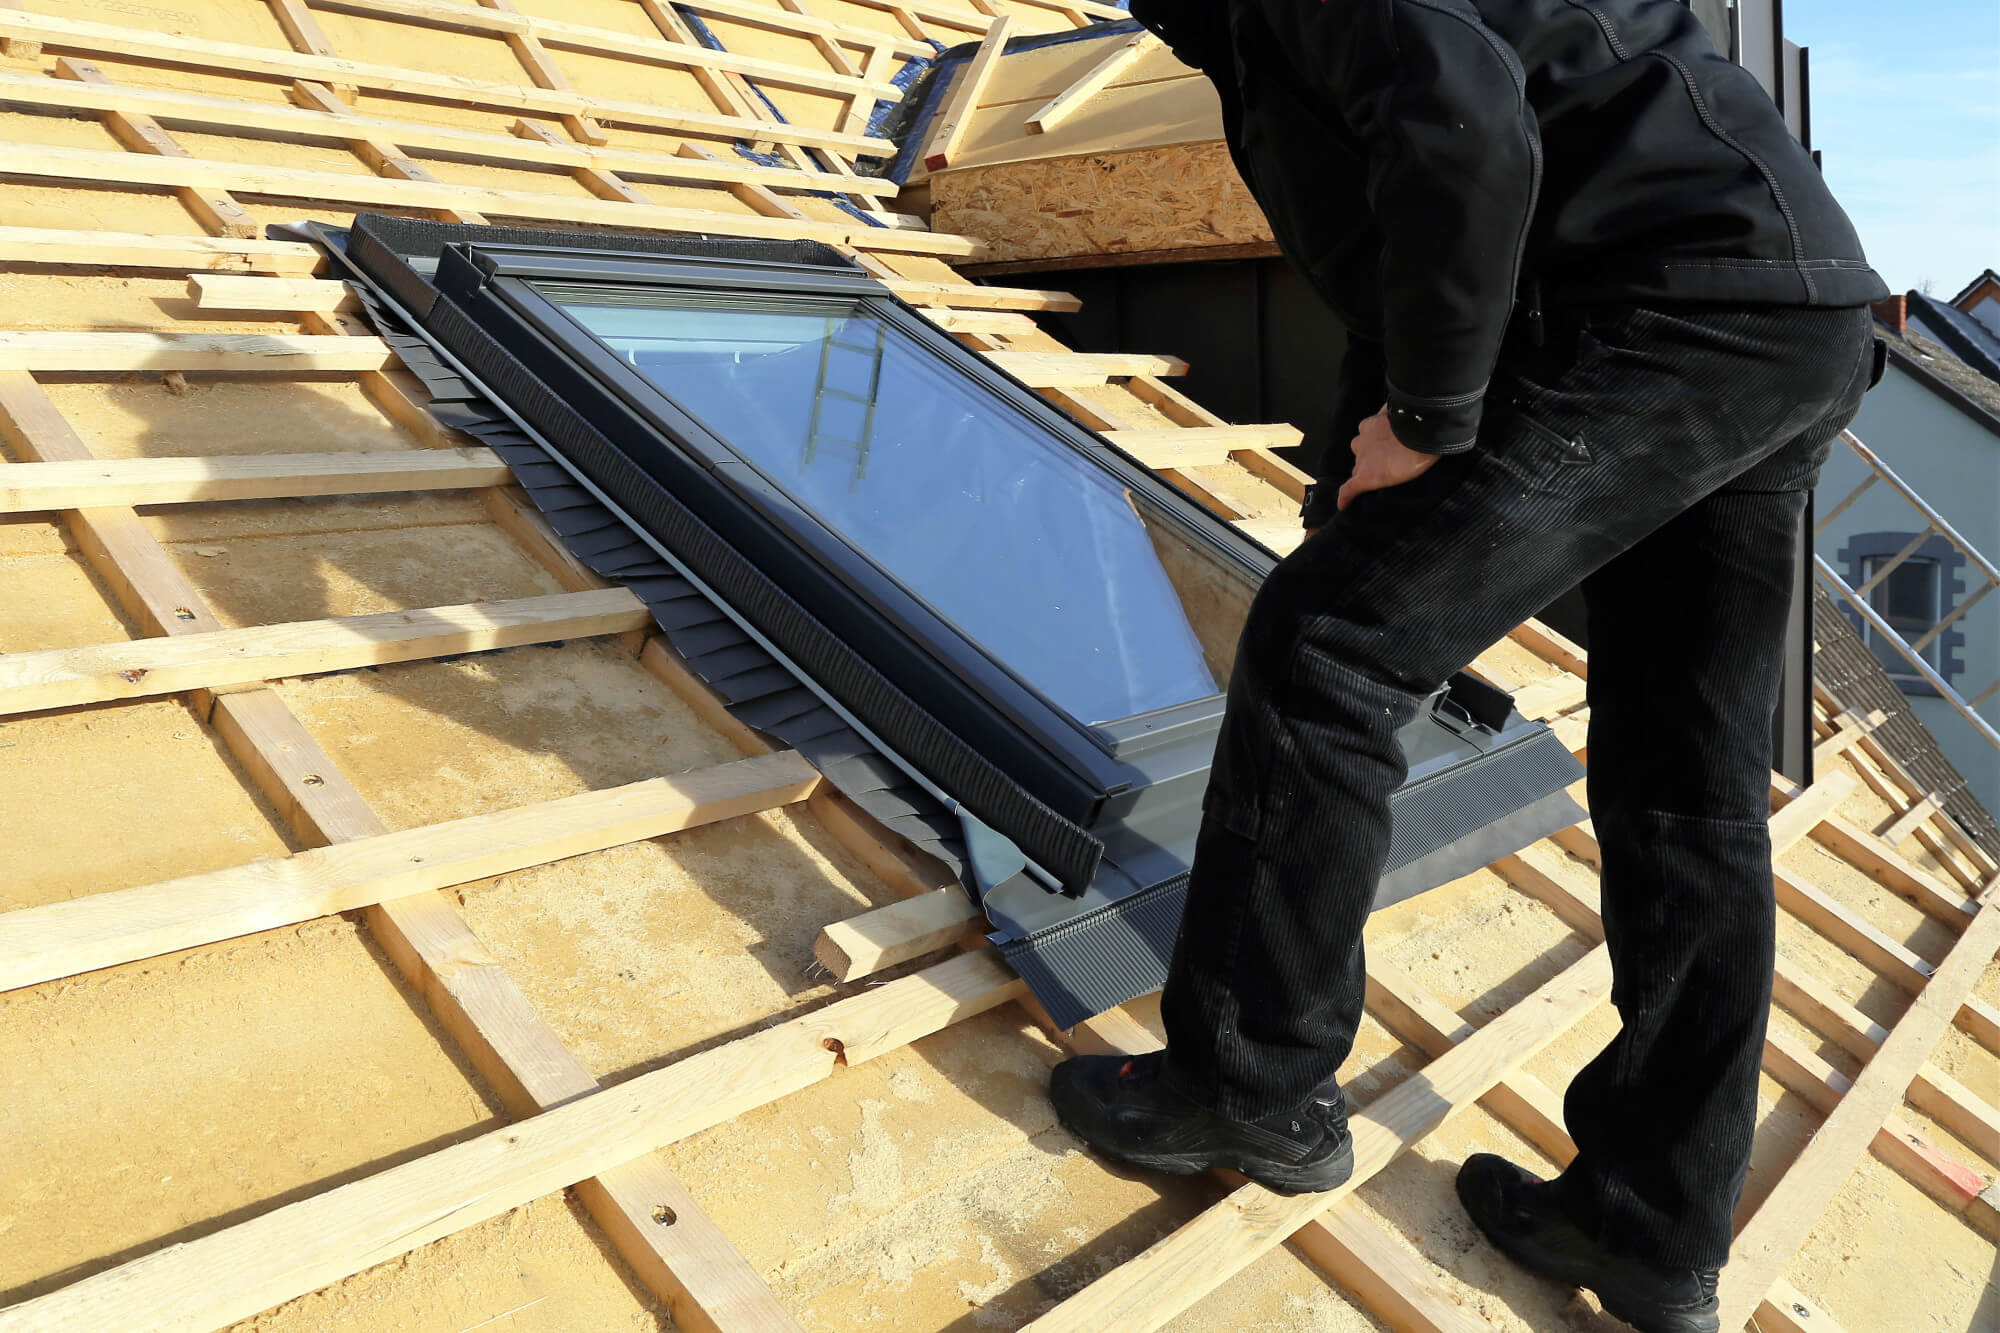 Sunroof inspection by a roofing supervisor